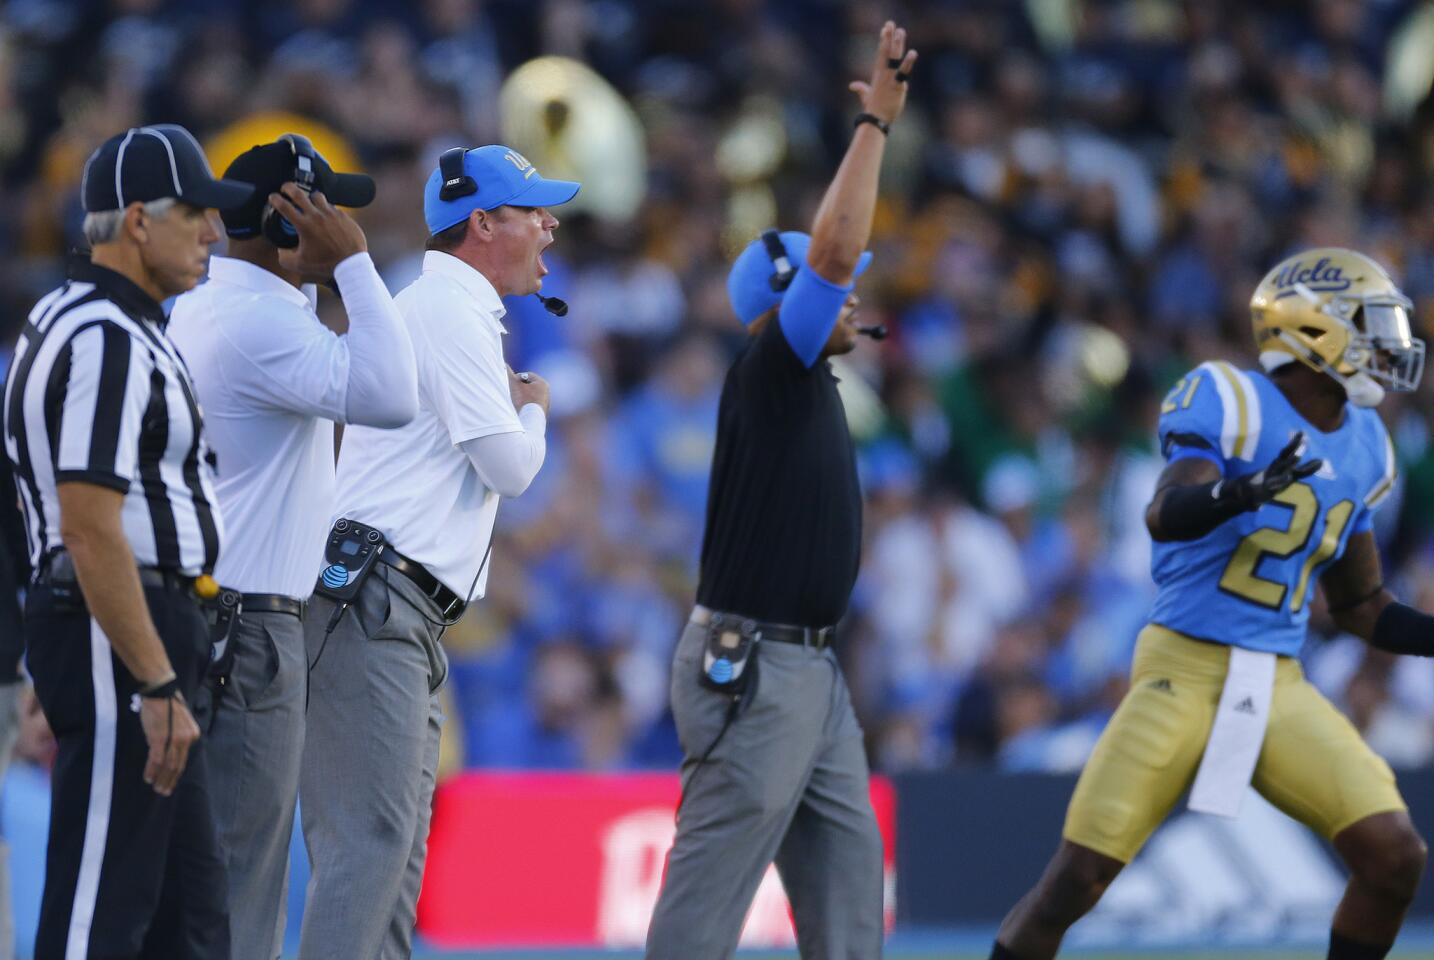 UCLA's run game fell short of expectations in loss to Stanford